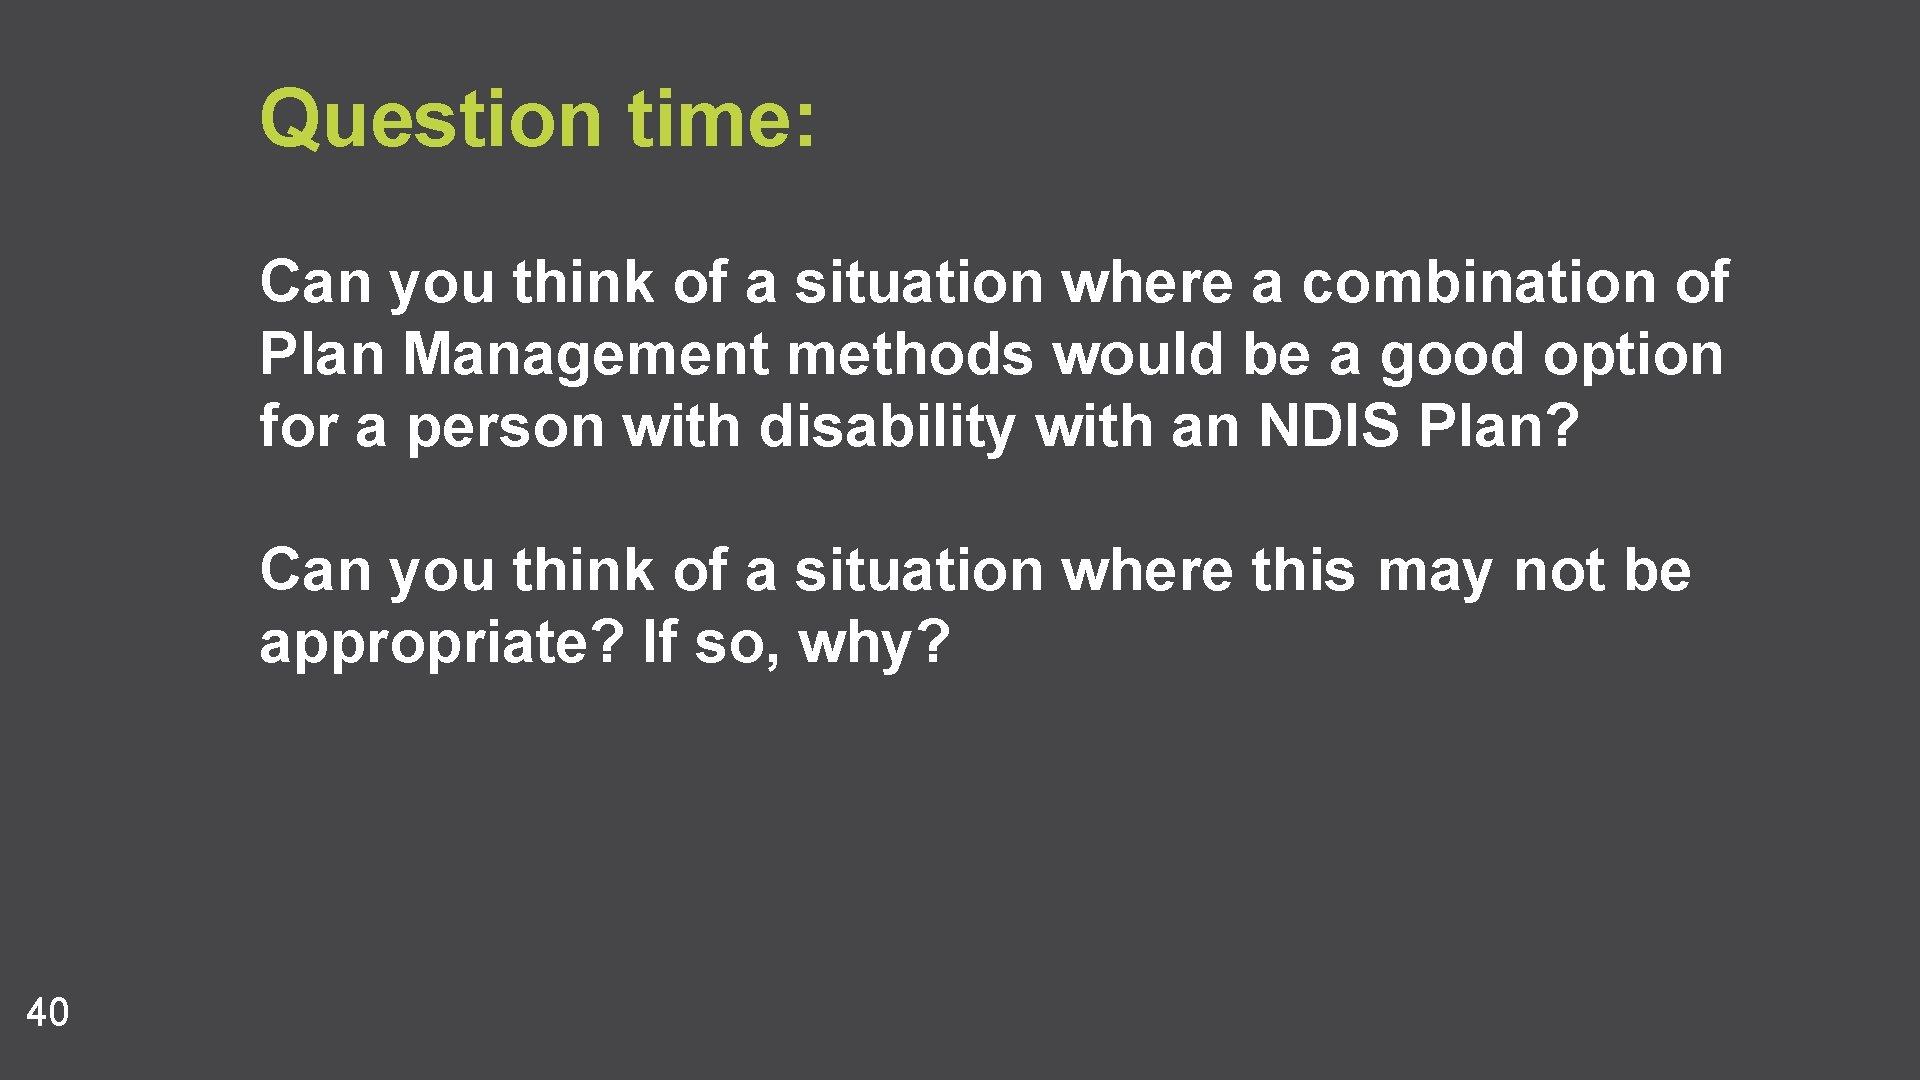 Question time: Can you think of a situation where a combination of Plan Management